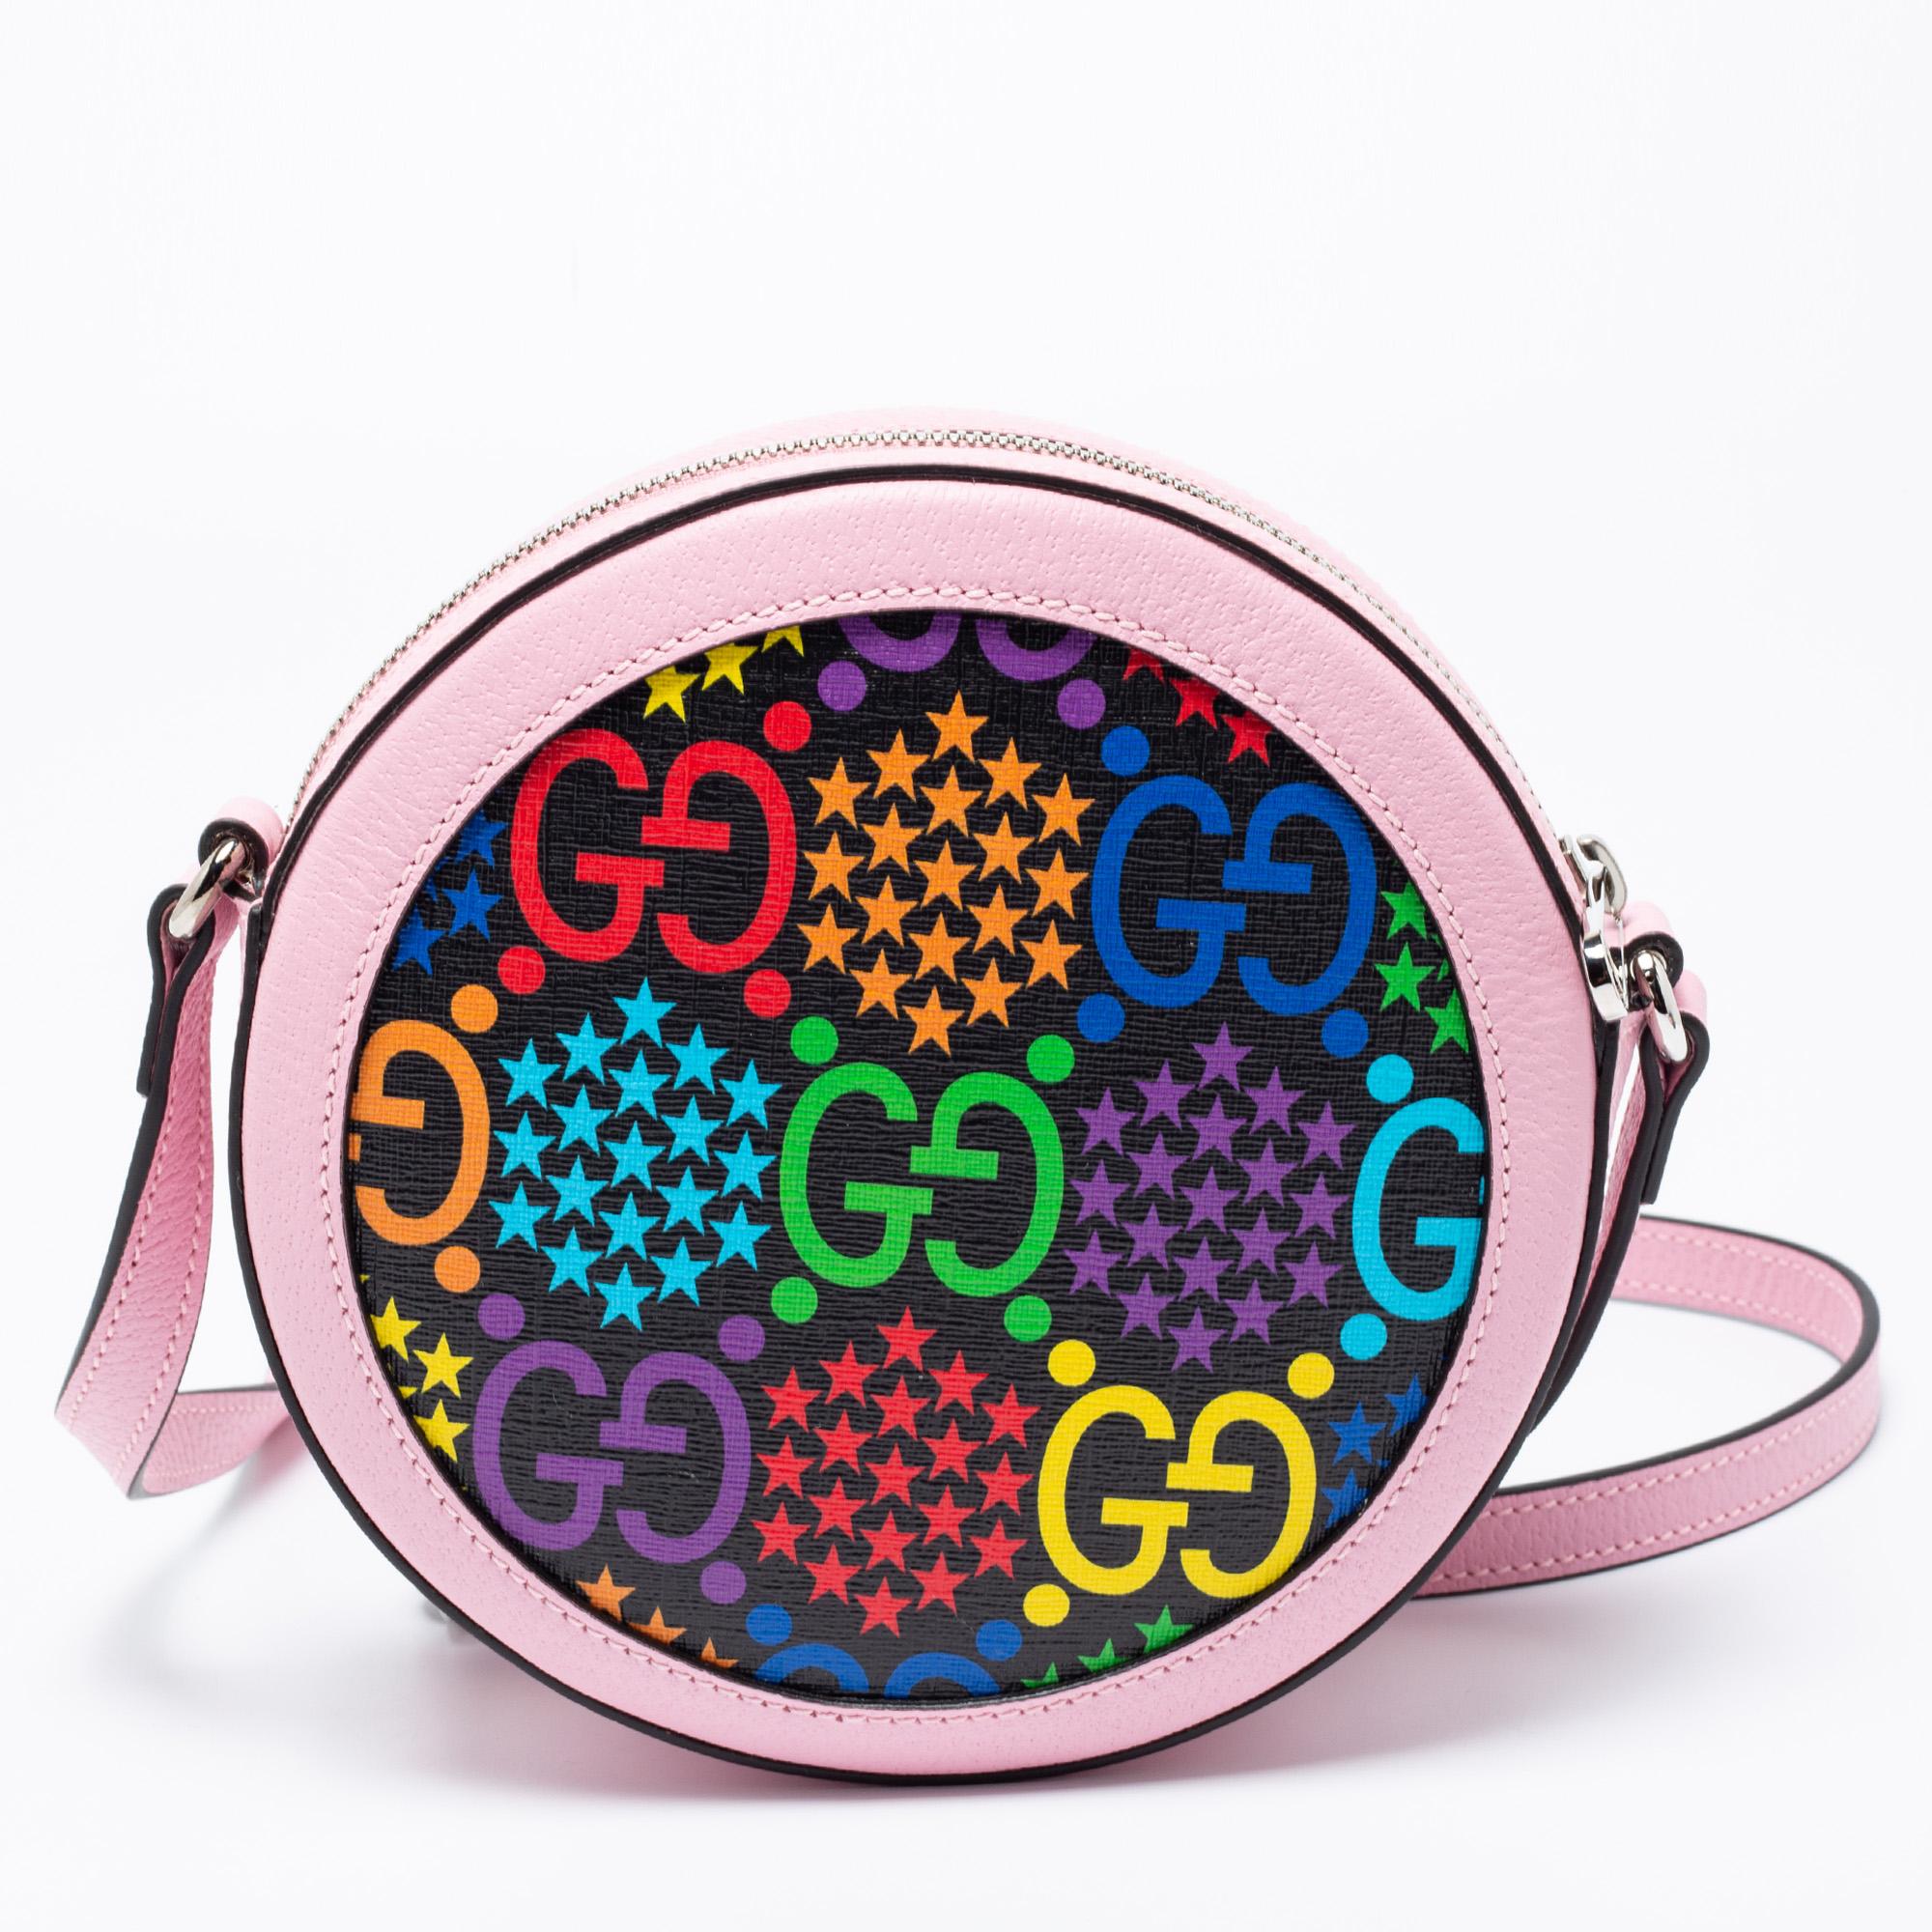 First witnessed in Cruise 2020 show, the GG Psychedelic collection reflects Alessandro Michele's bold and confident approach to fashion. This crossbody bag is made with proper attention to detail and is impressive with its kaleidoscopic pattern.